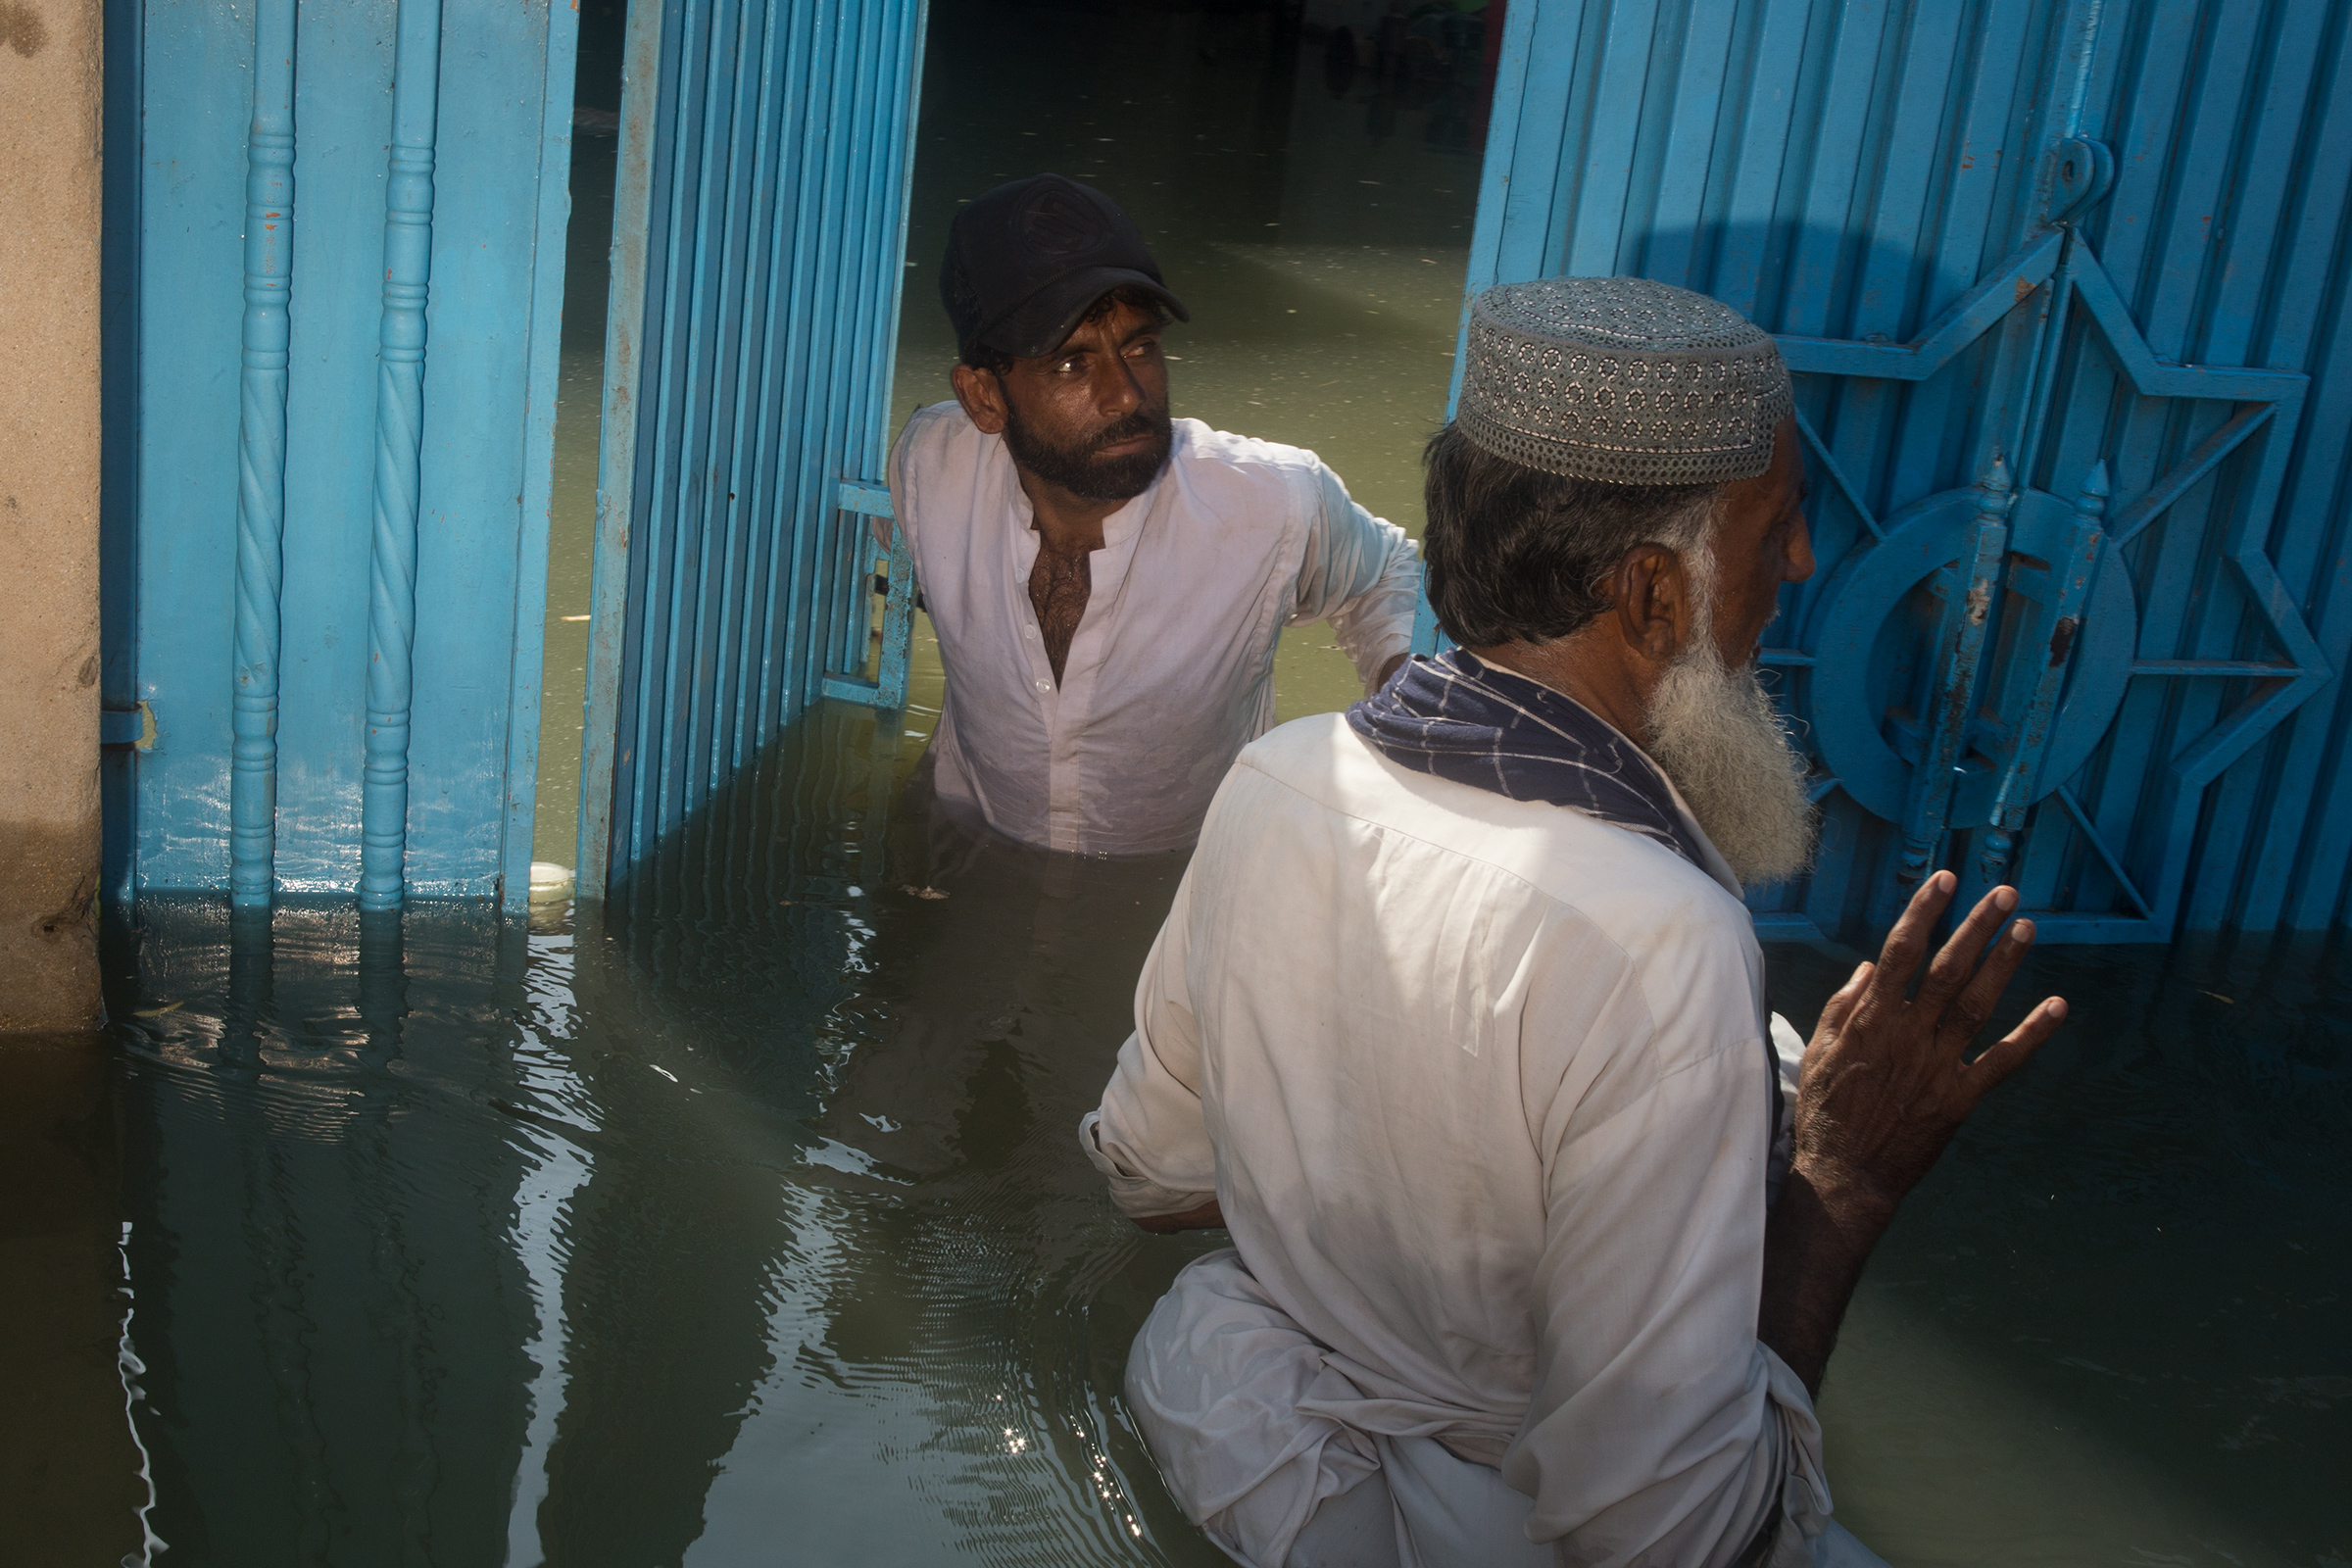 A heavily flooded home in the village of Rajo Nizamani, near Jirk, September 10.  (Hasan Gondal for TIME)